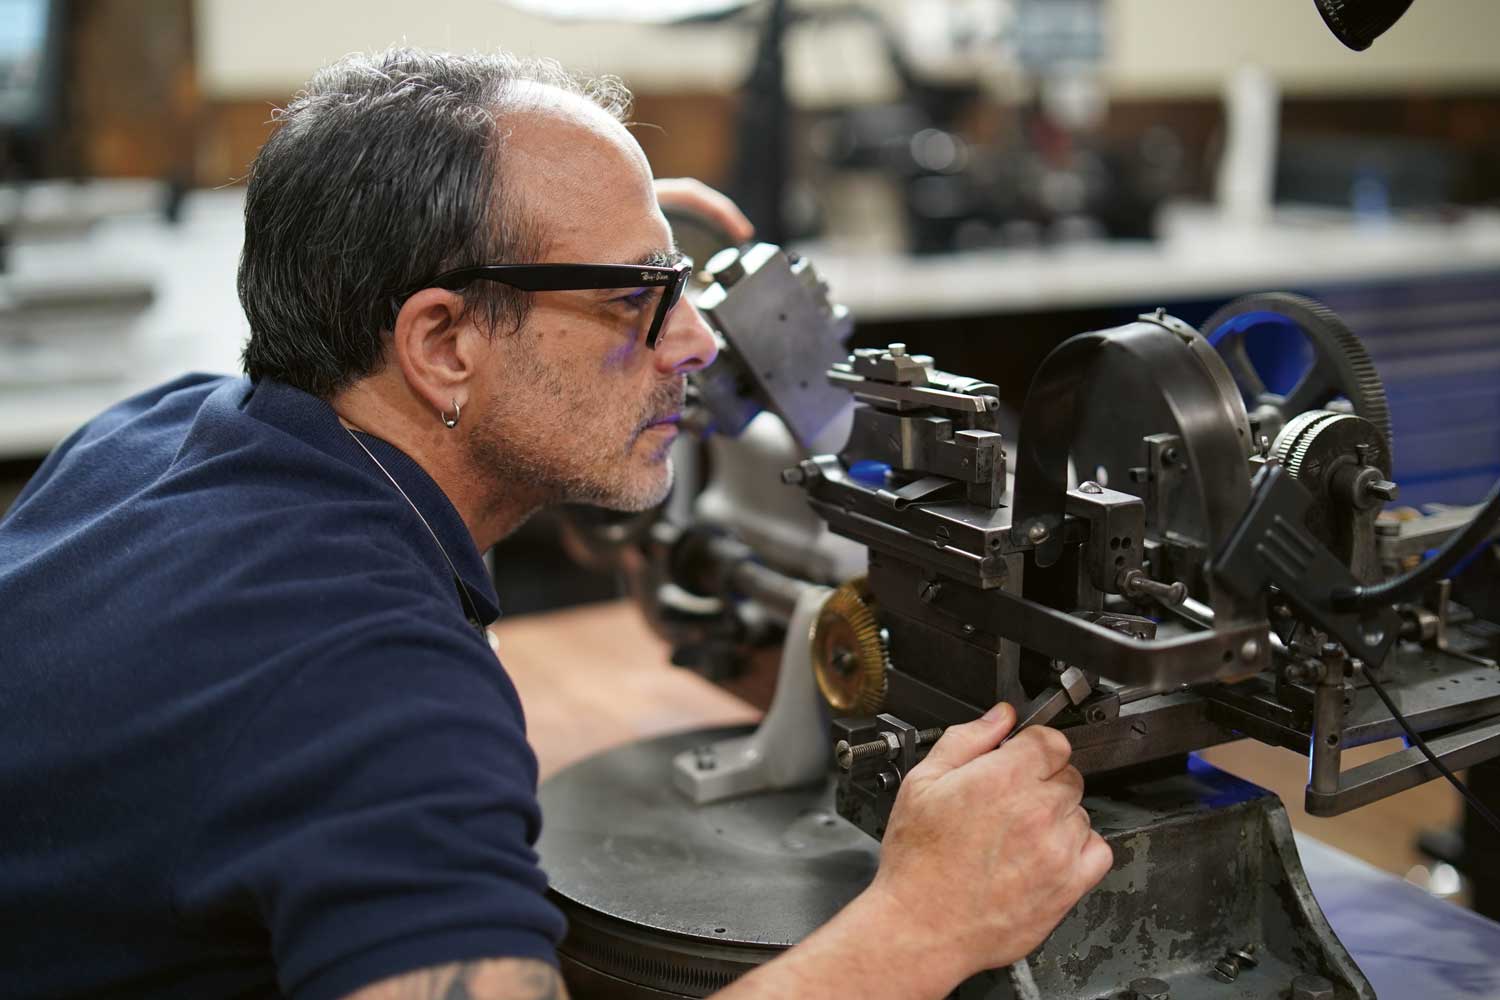 Dan Spitz works alone on restored machines constructing everything himself, including his own ergonomic watchmaker’s bench (Images: Lynnette Brink)